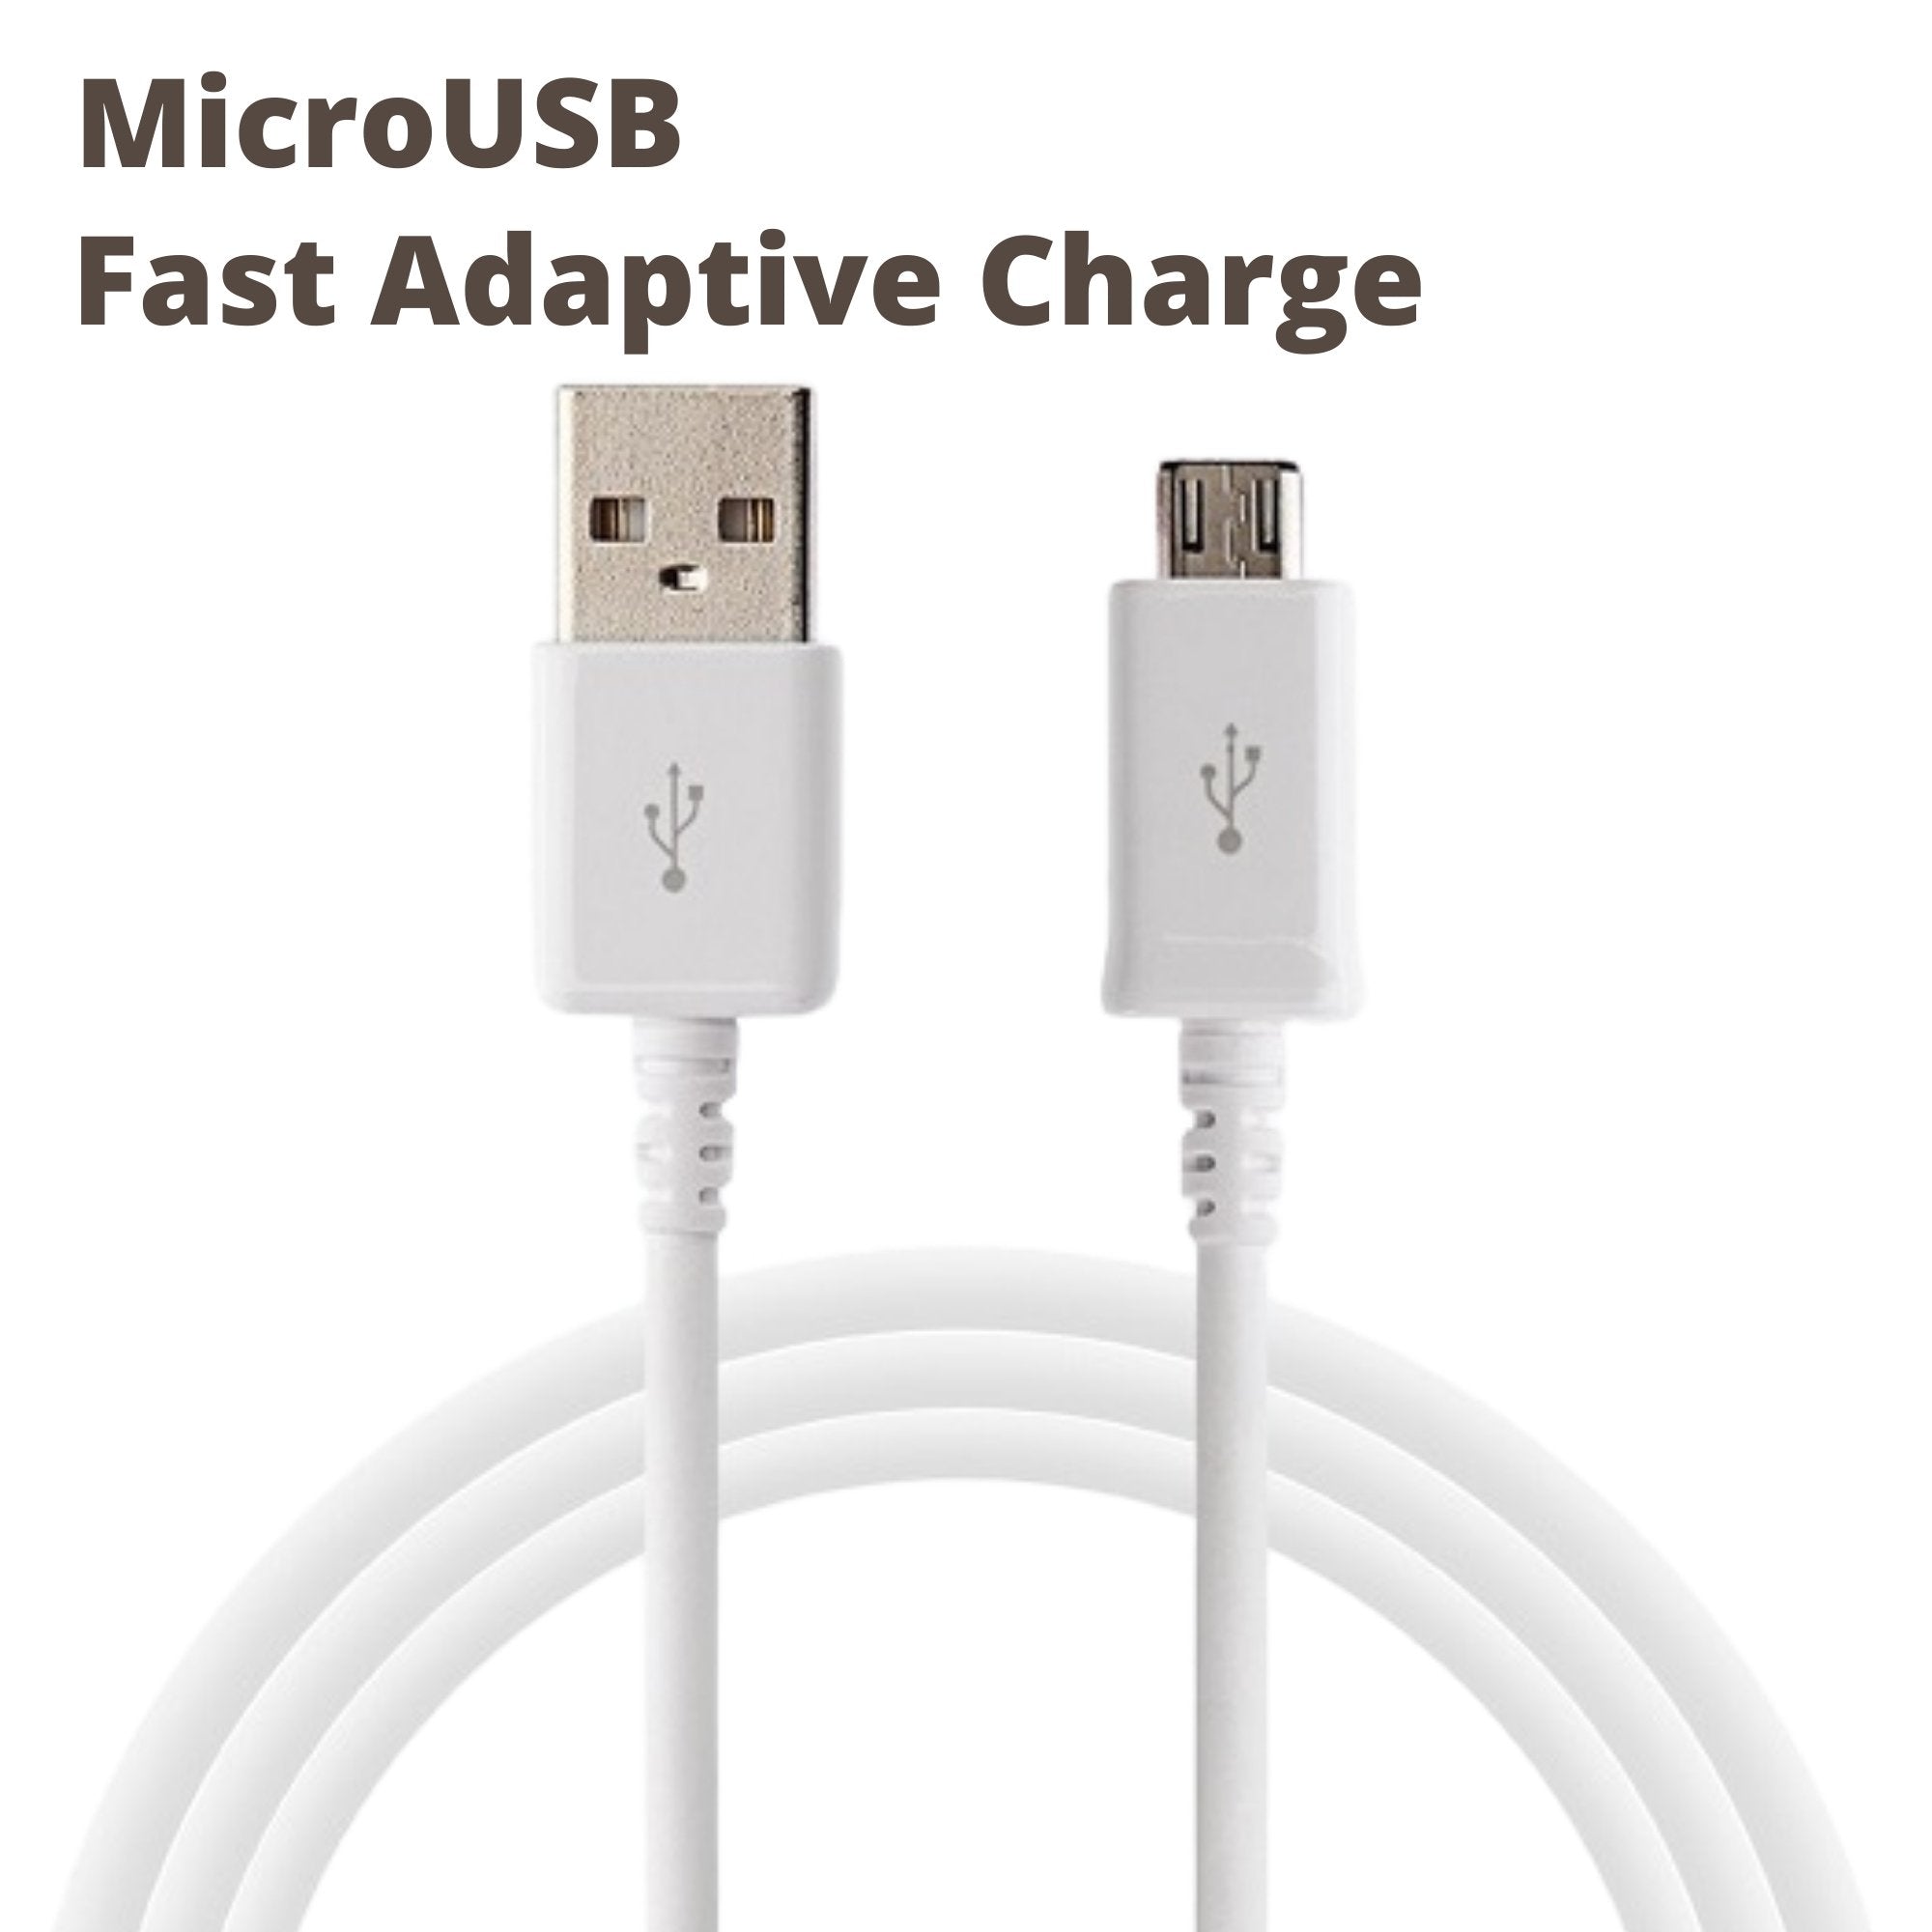 Samsung A10 Adaptive Mobile Charger 2 Amp With Adaptive Fast Cable White